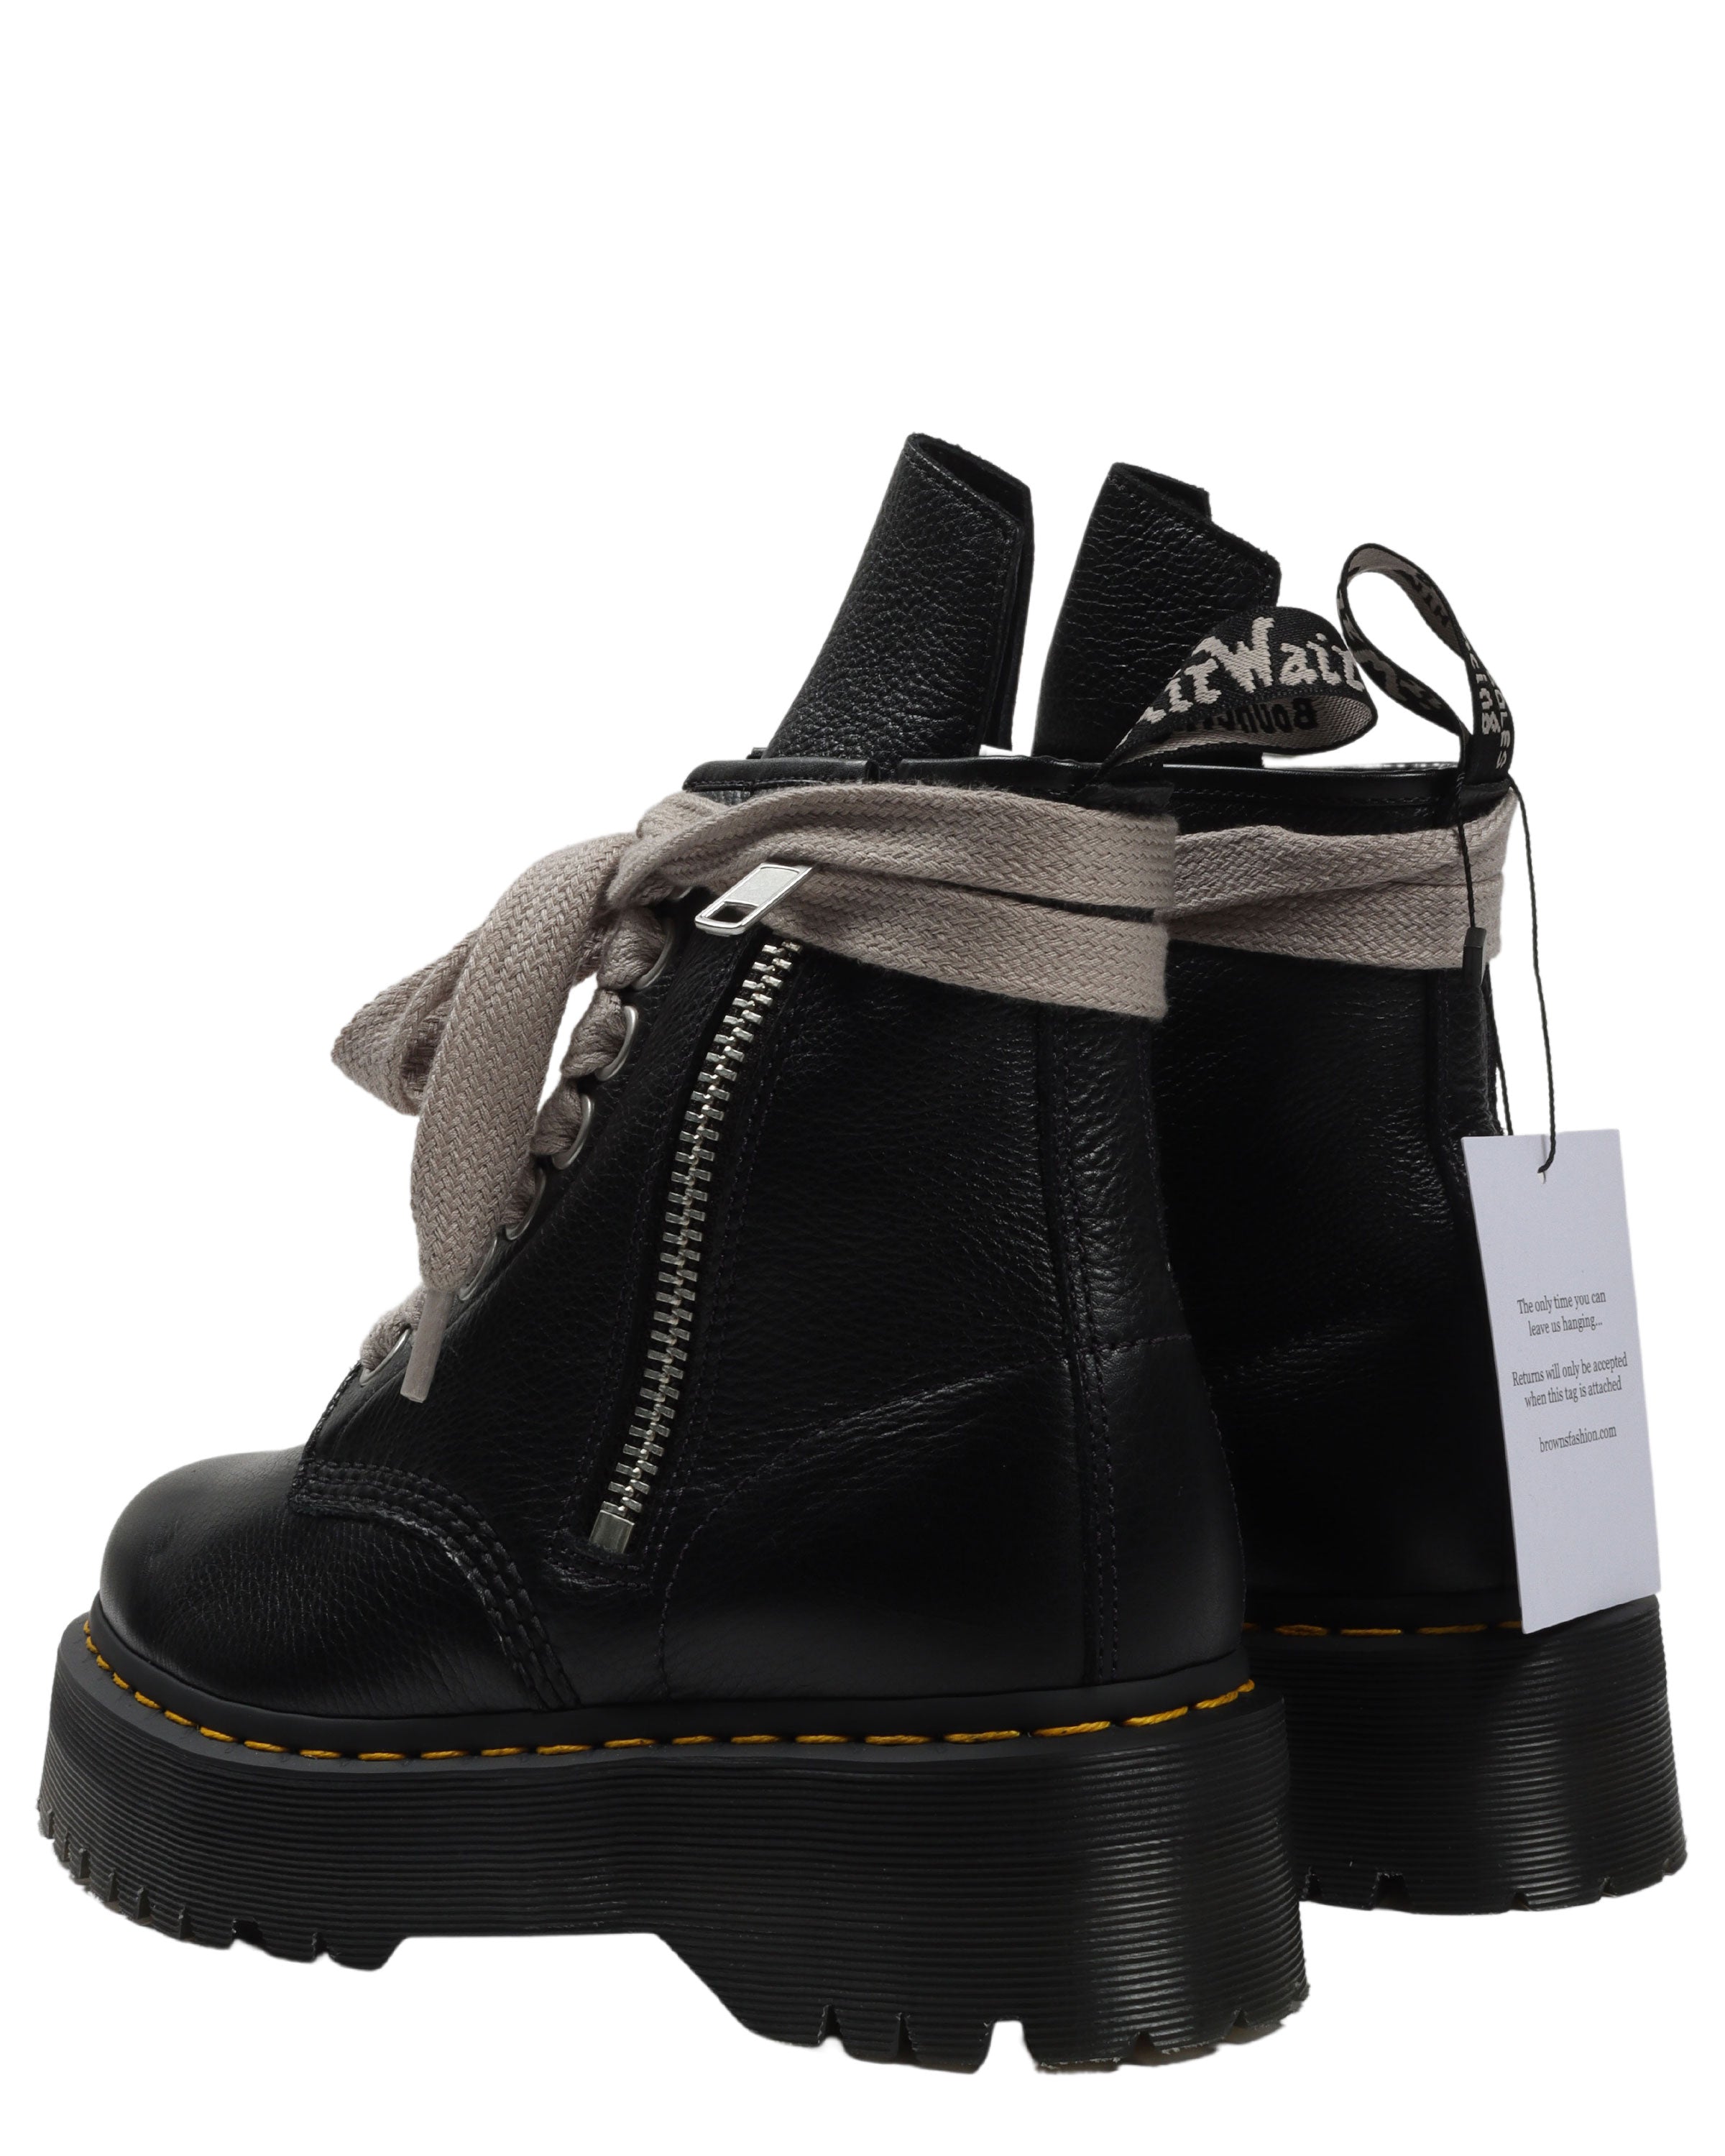 Dr. Martens 1460 Bex Leather Boots